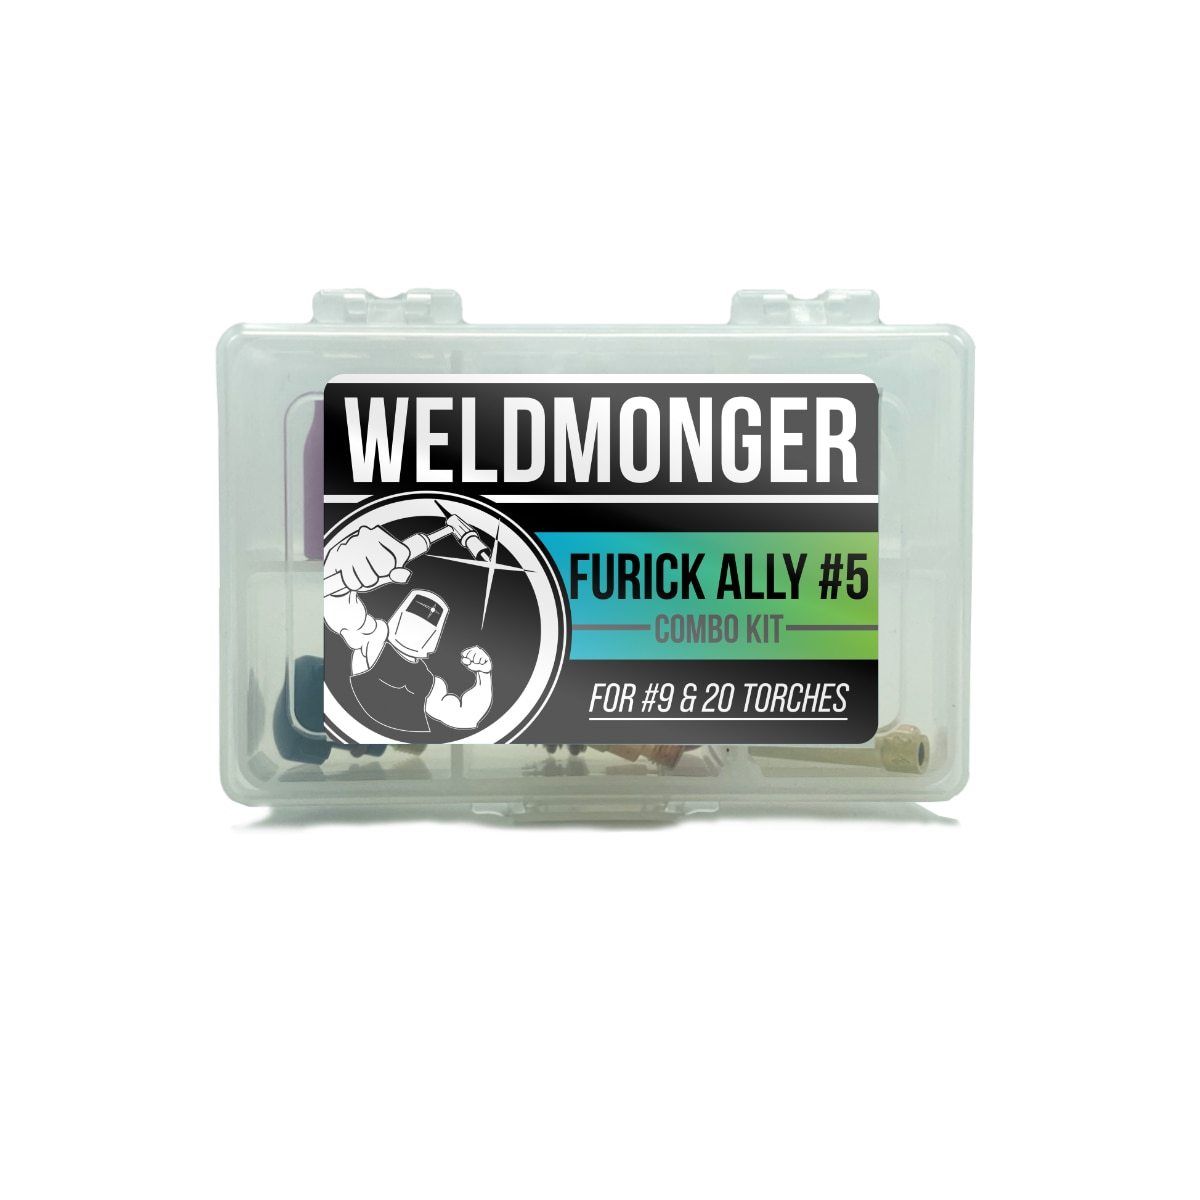 WELDMONGER® Furick Ally #5 Combo Kit - For #9 AND #20 Style Torches